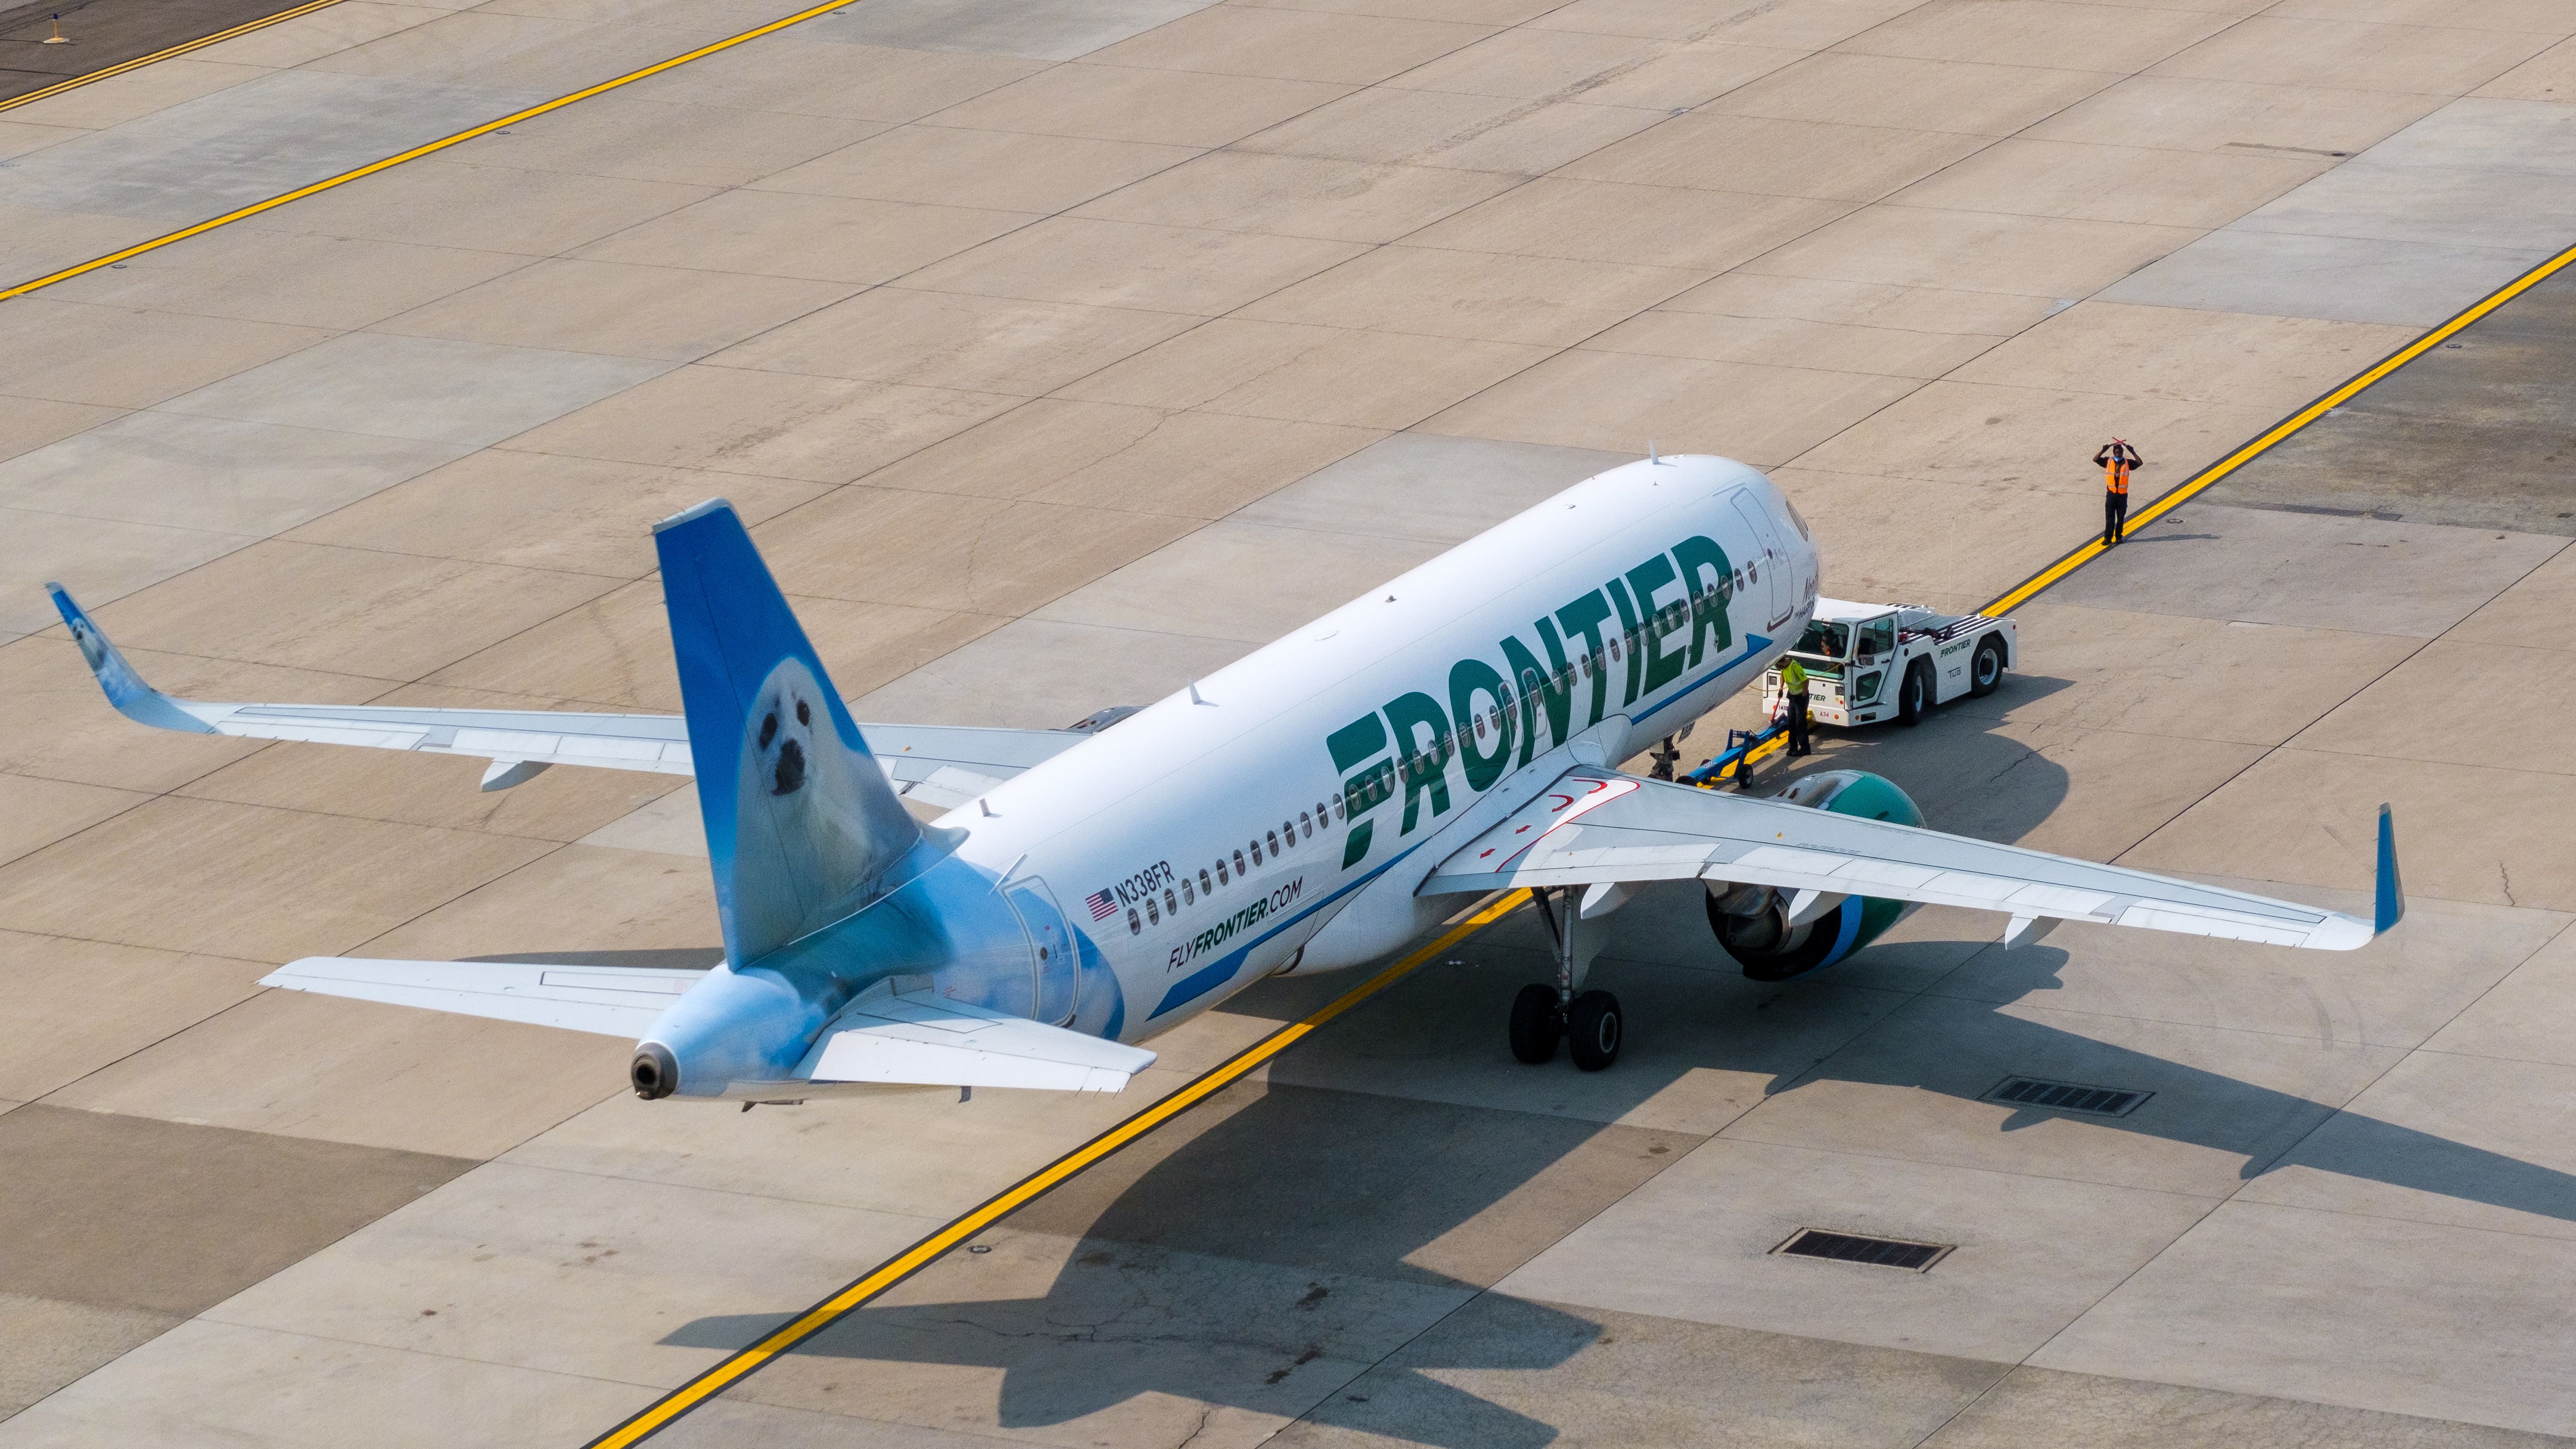 Frontier Airbus On Taxiway